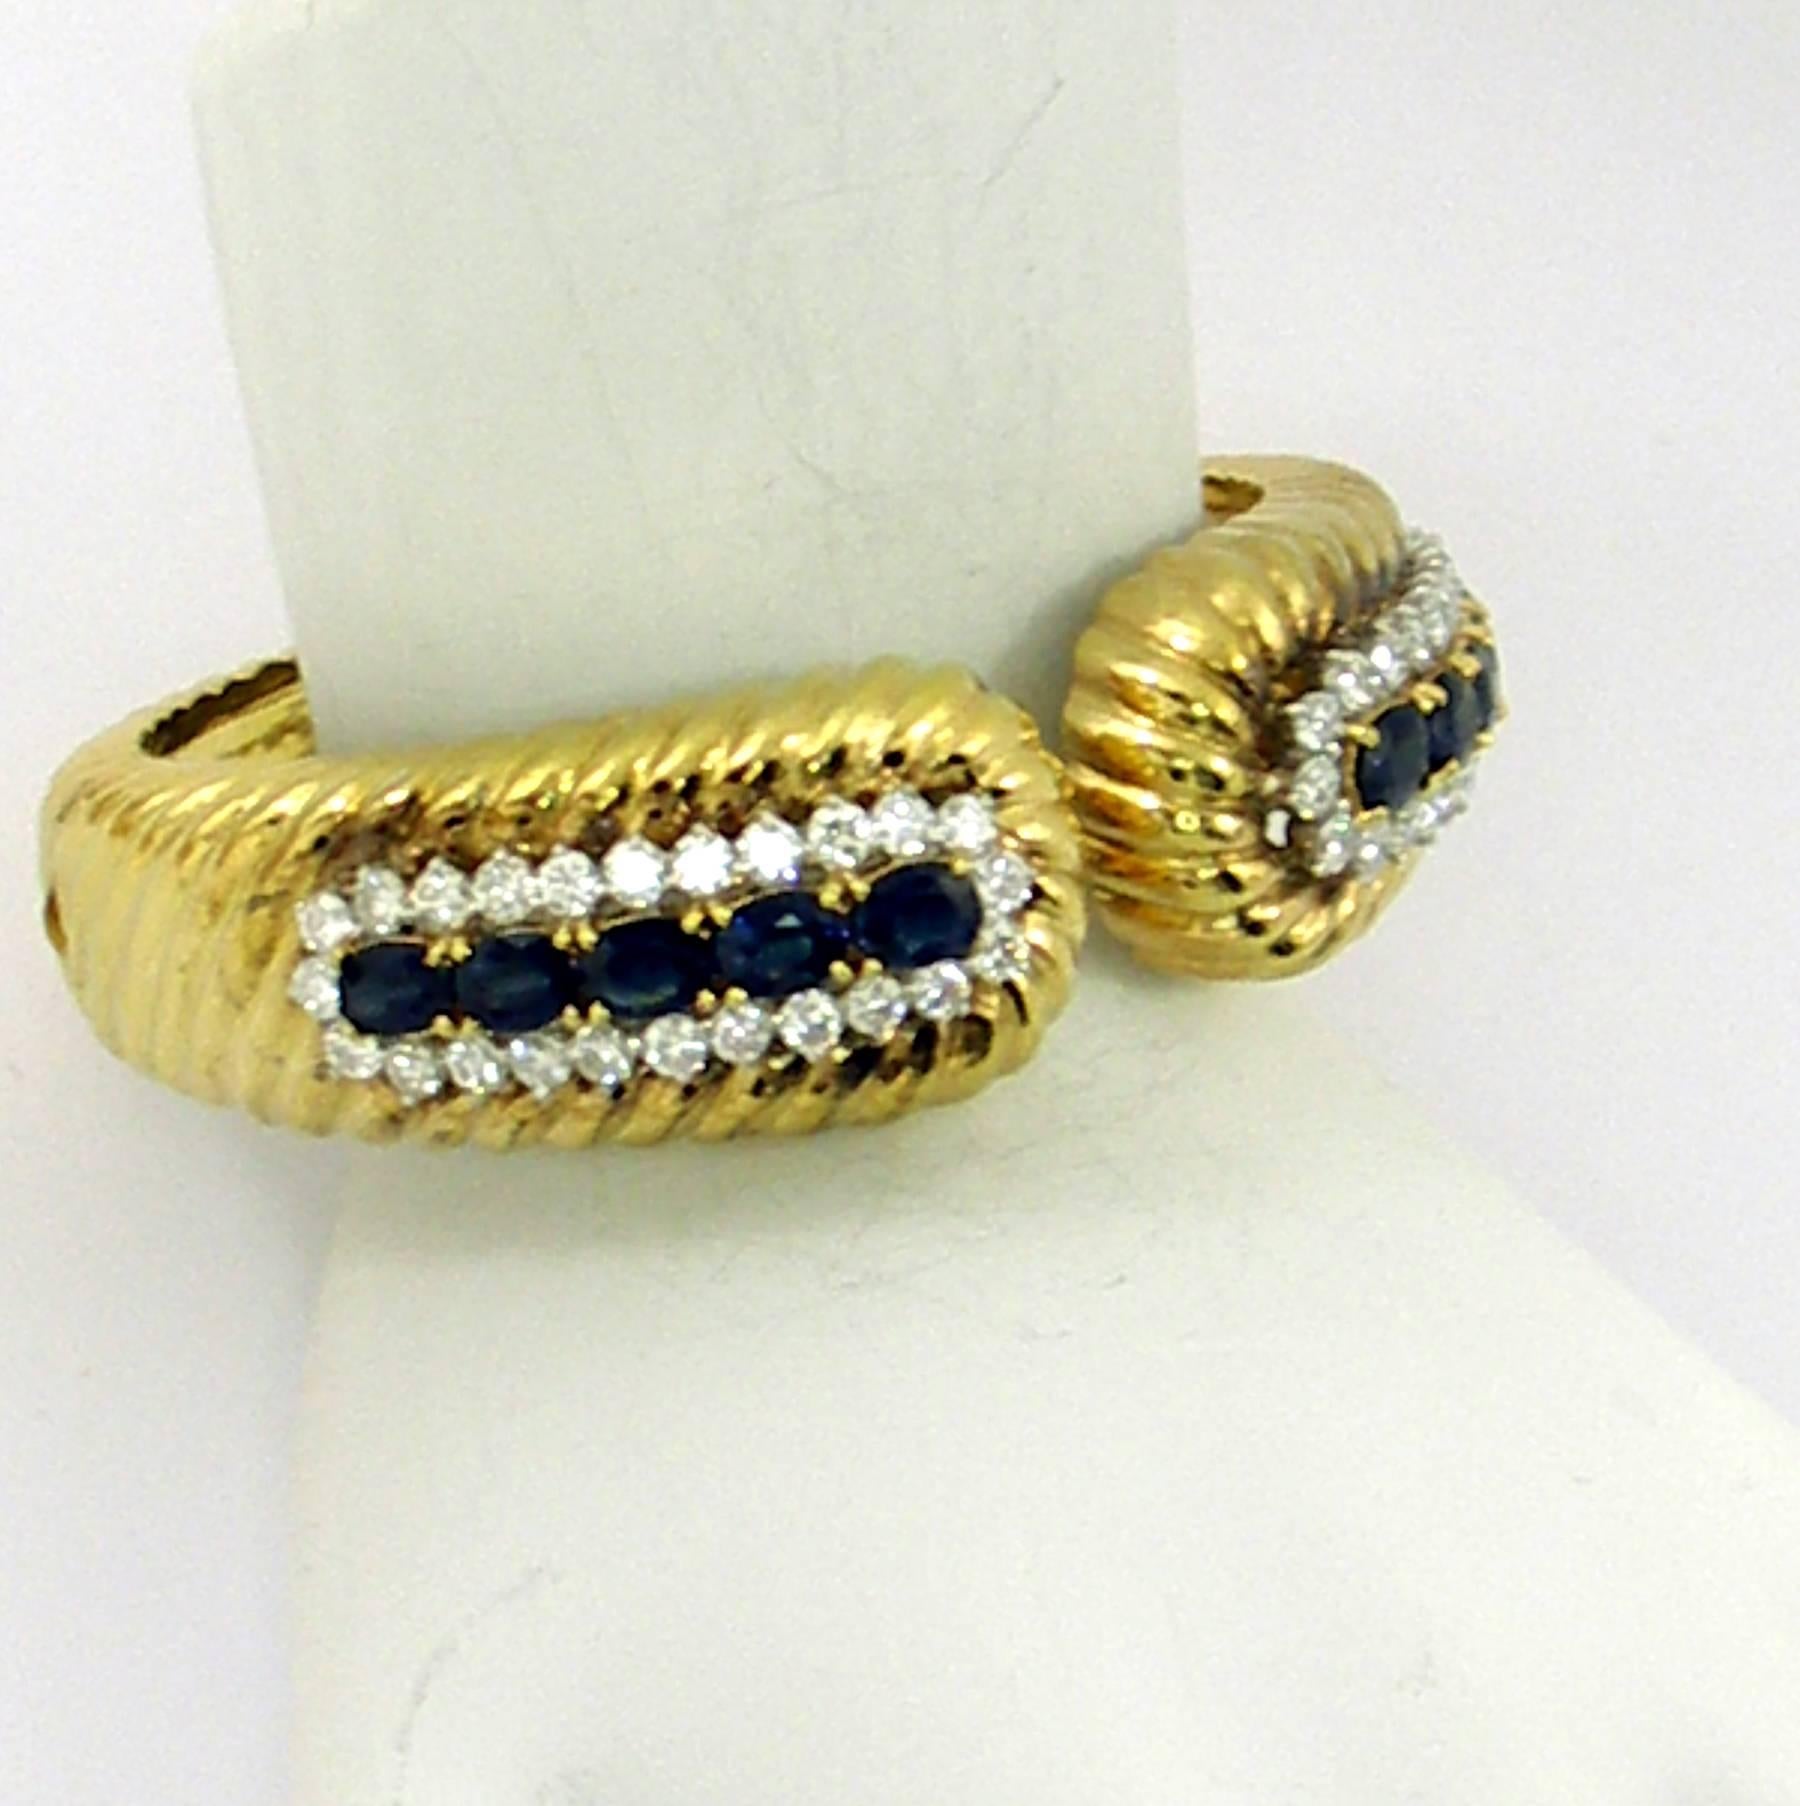 An 18kt yellow gold bracelet tapering in width from 3/4 of an inch, down to 3/8 of inch at the base. Bracelet is set with 48 round brilliant cut diamonds weighing 3.33ct total approximate weight, and 10 oval faceted sapphires for a total weight of